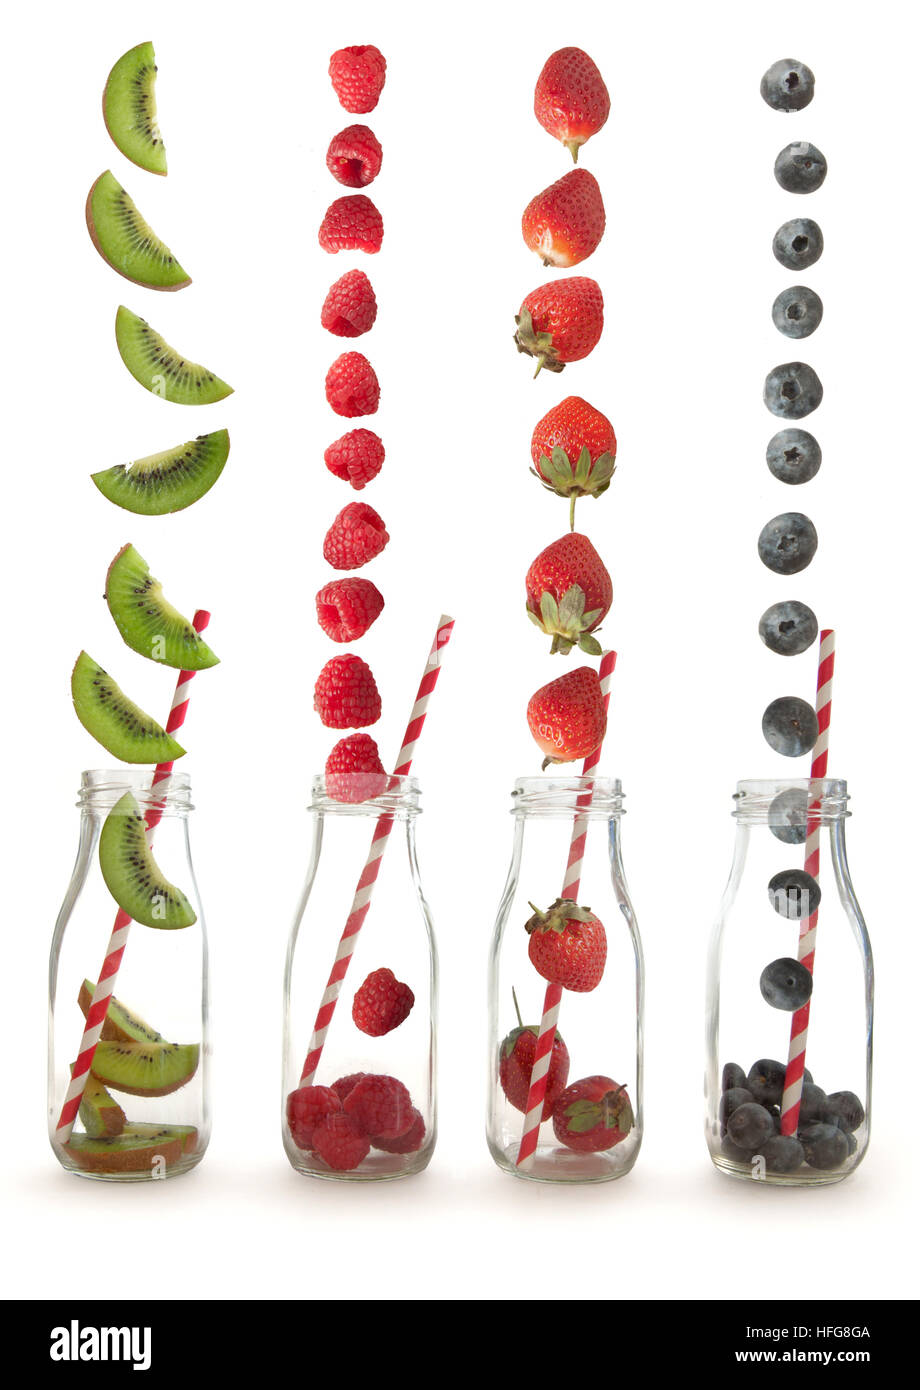 Berry fruits and kiwi falling into glass bottles with straws over a white background Stock Photo